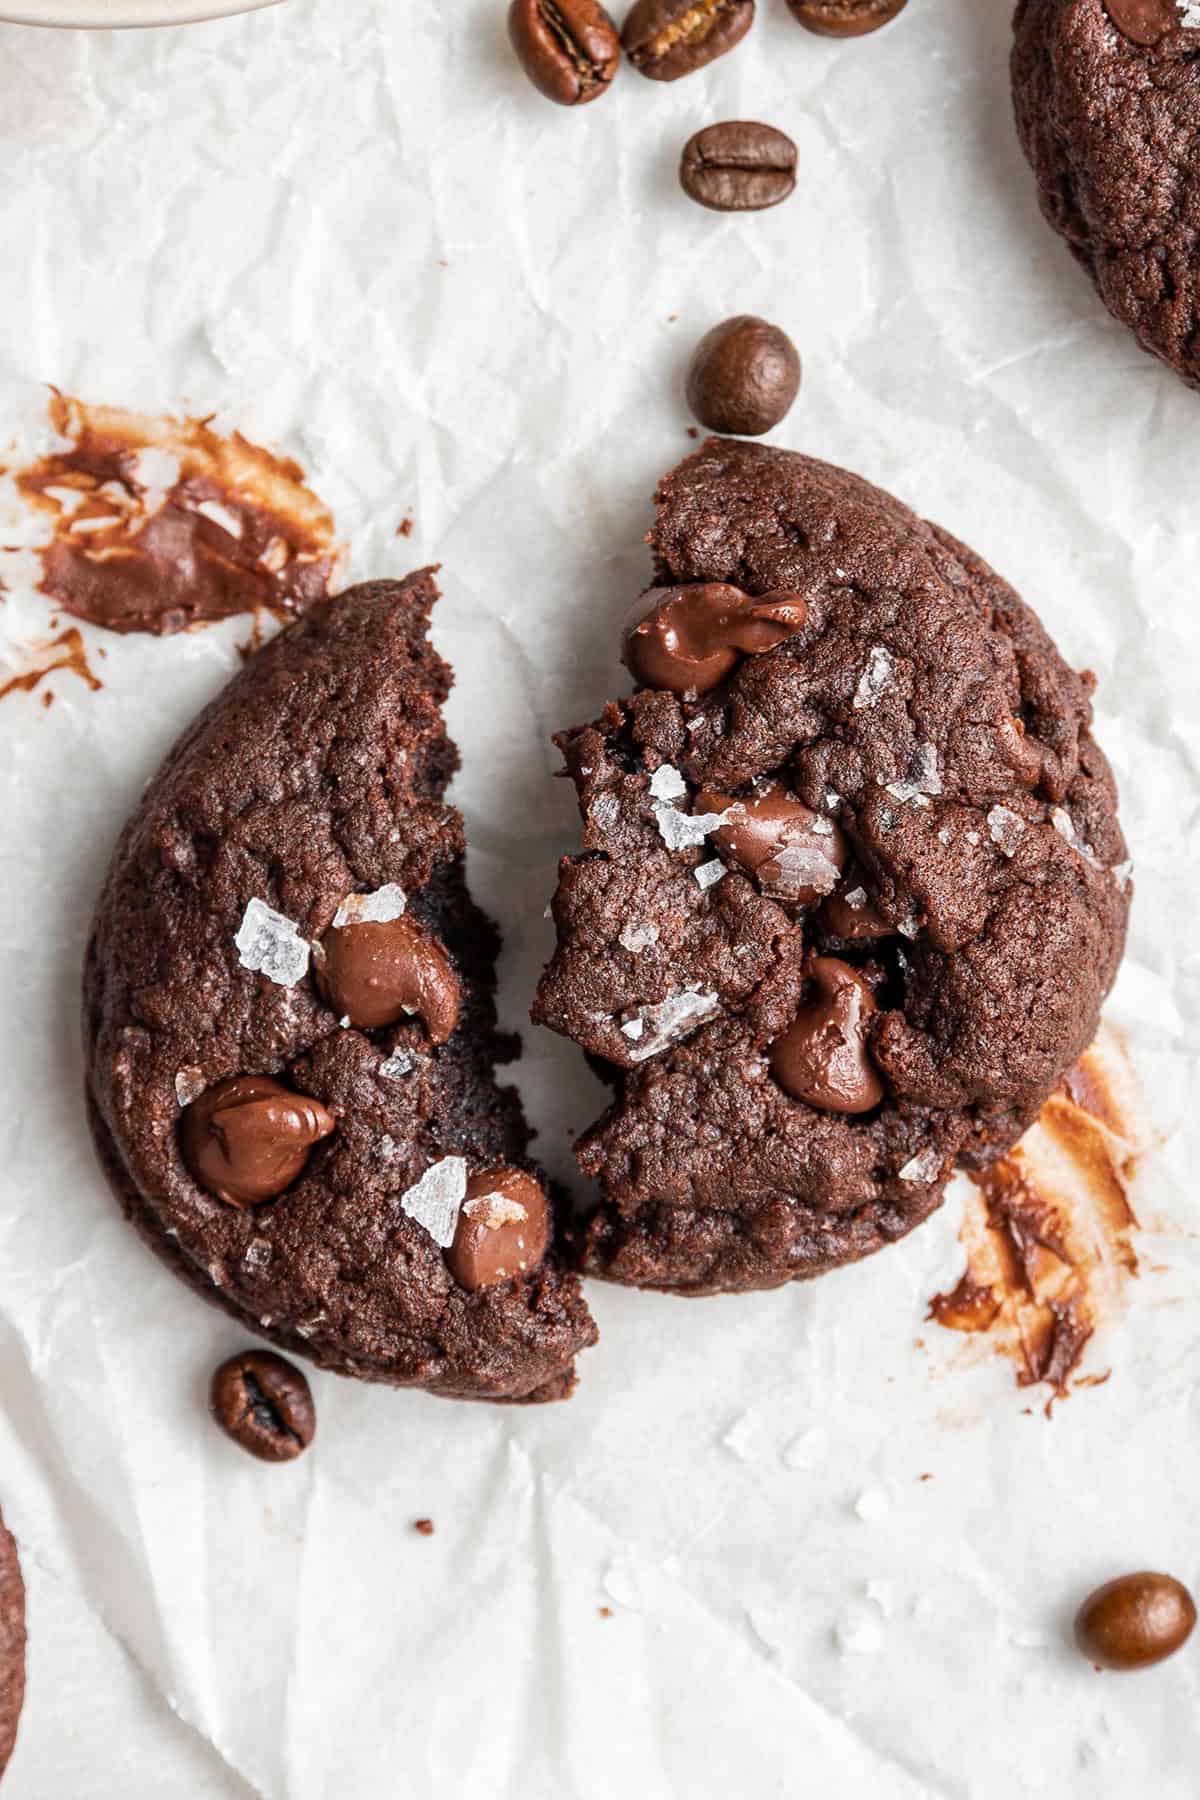 An espresso cookie broken in half, with chocolate smeared on the table, surrounded by espresso beans